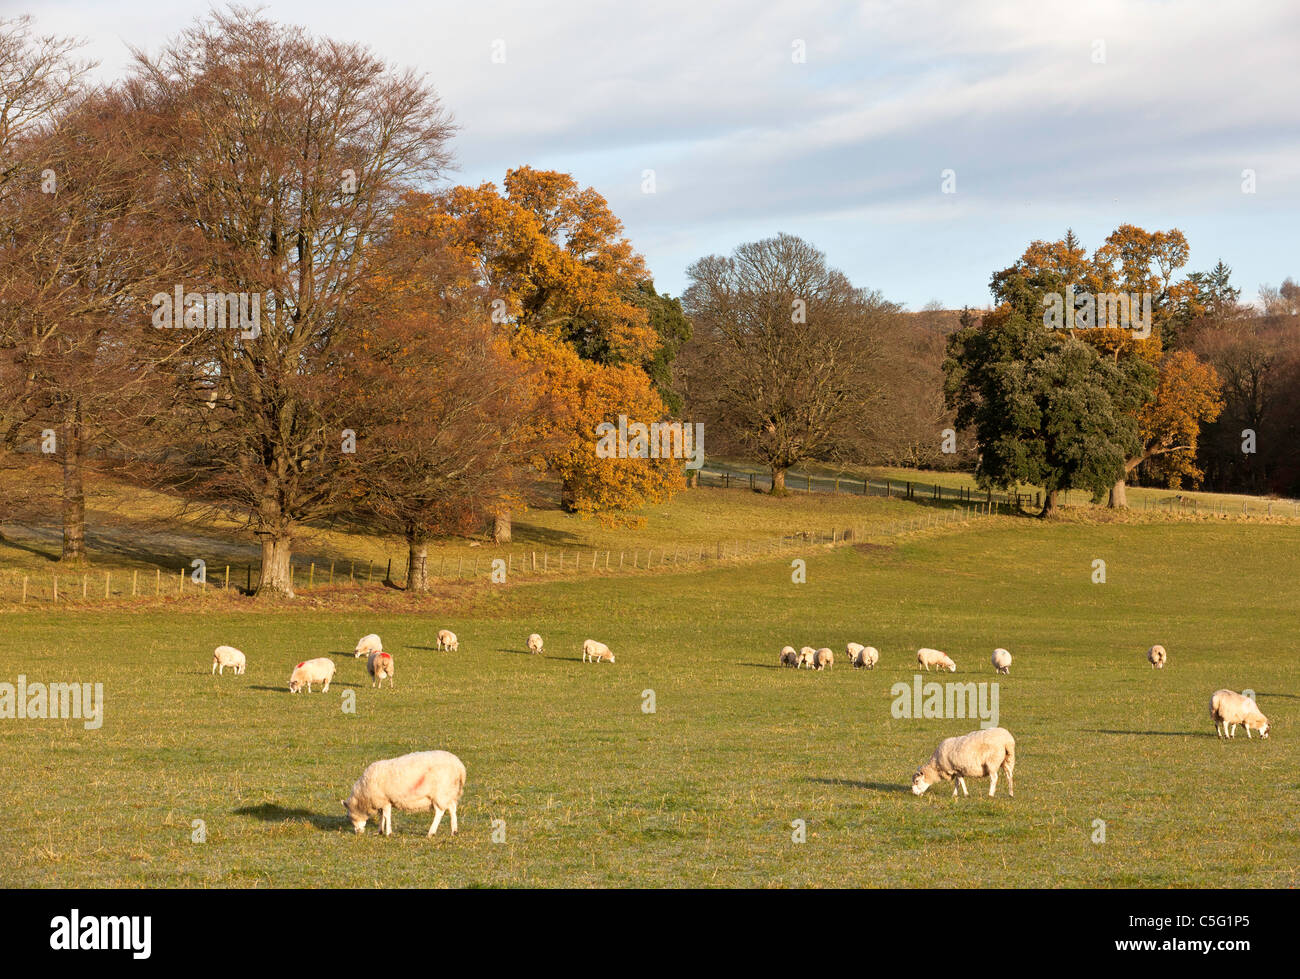 Rural scene with sheep in the foreground Stock Photo